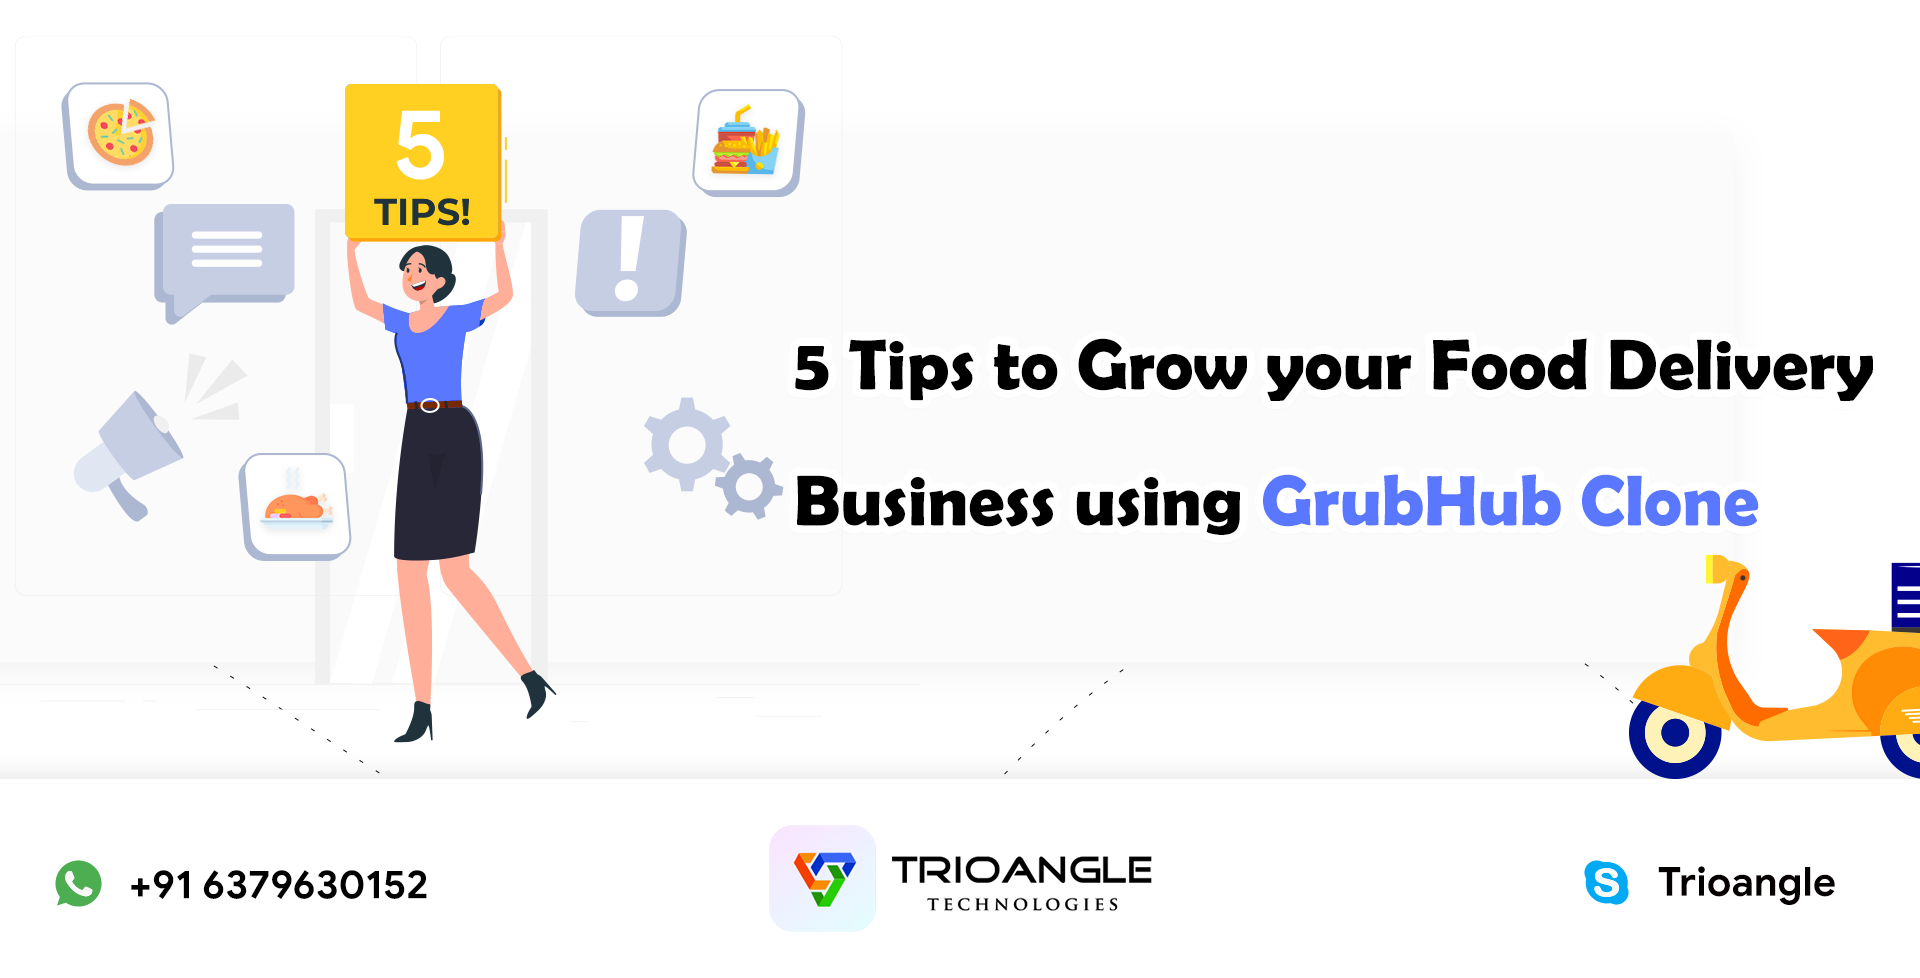 5 Tips to Grow your Food Delivery Business using Grubhub Clone